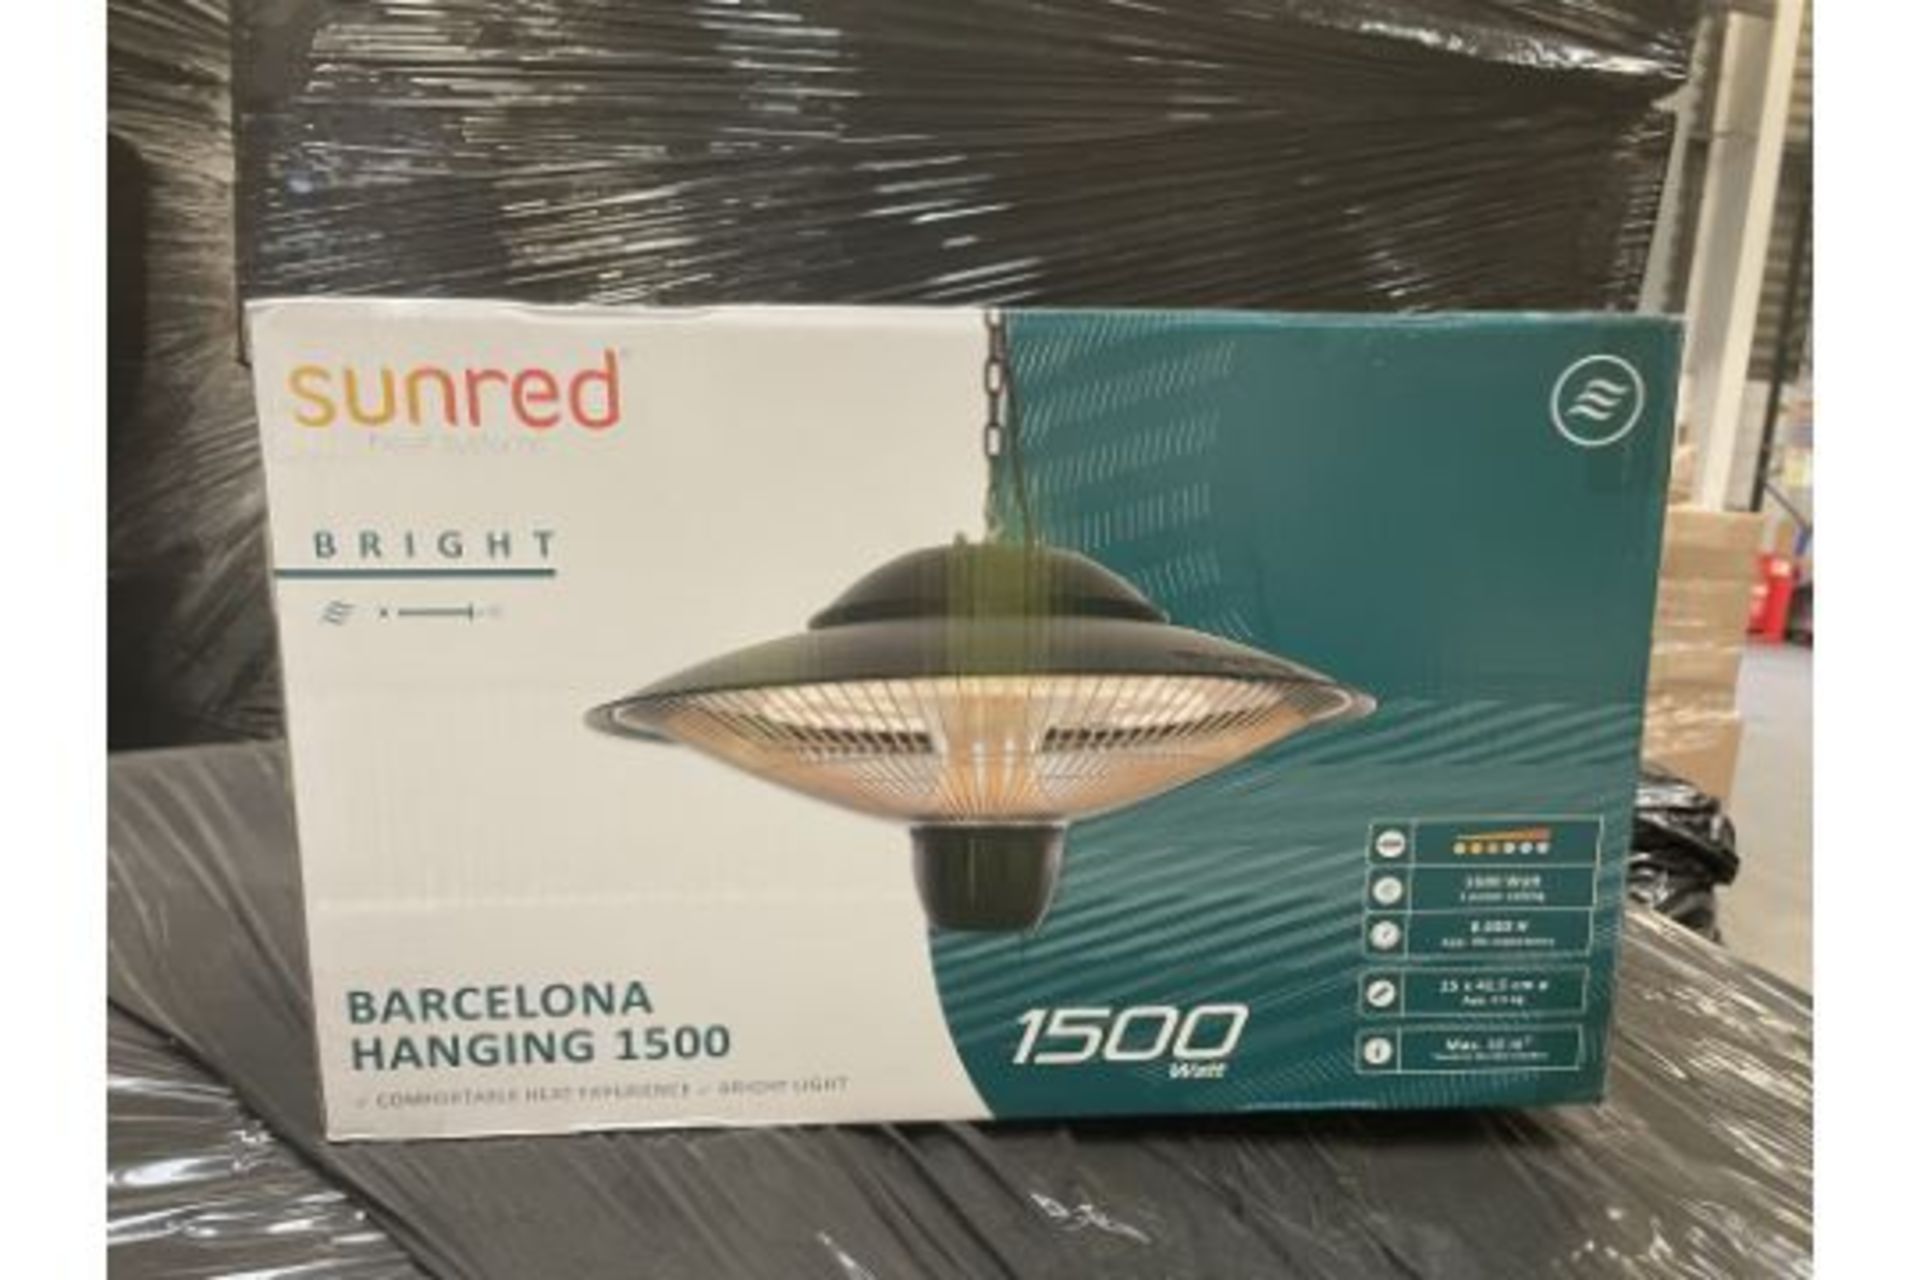 Brand New The Sunred Heater Barcelona Hanging 1500W RRP £299.A high quality and efficient outdoor